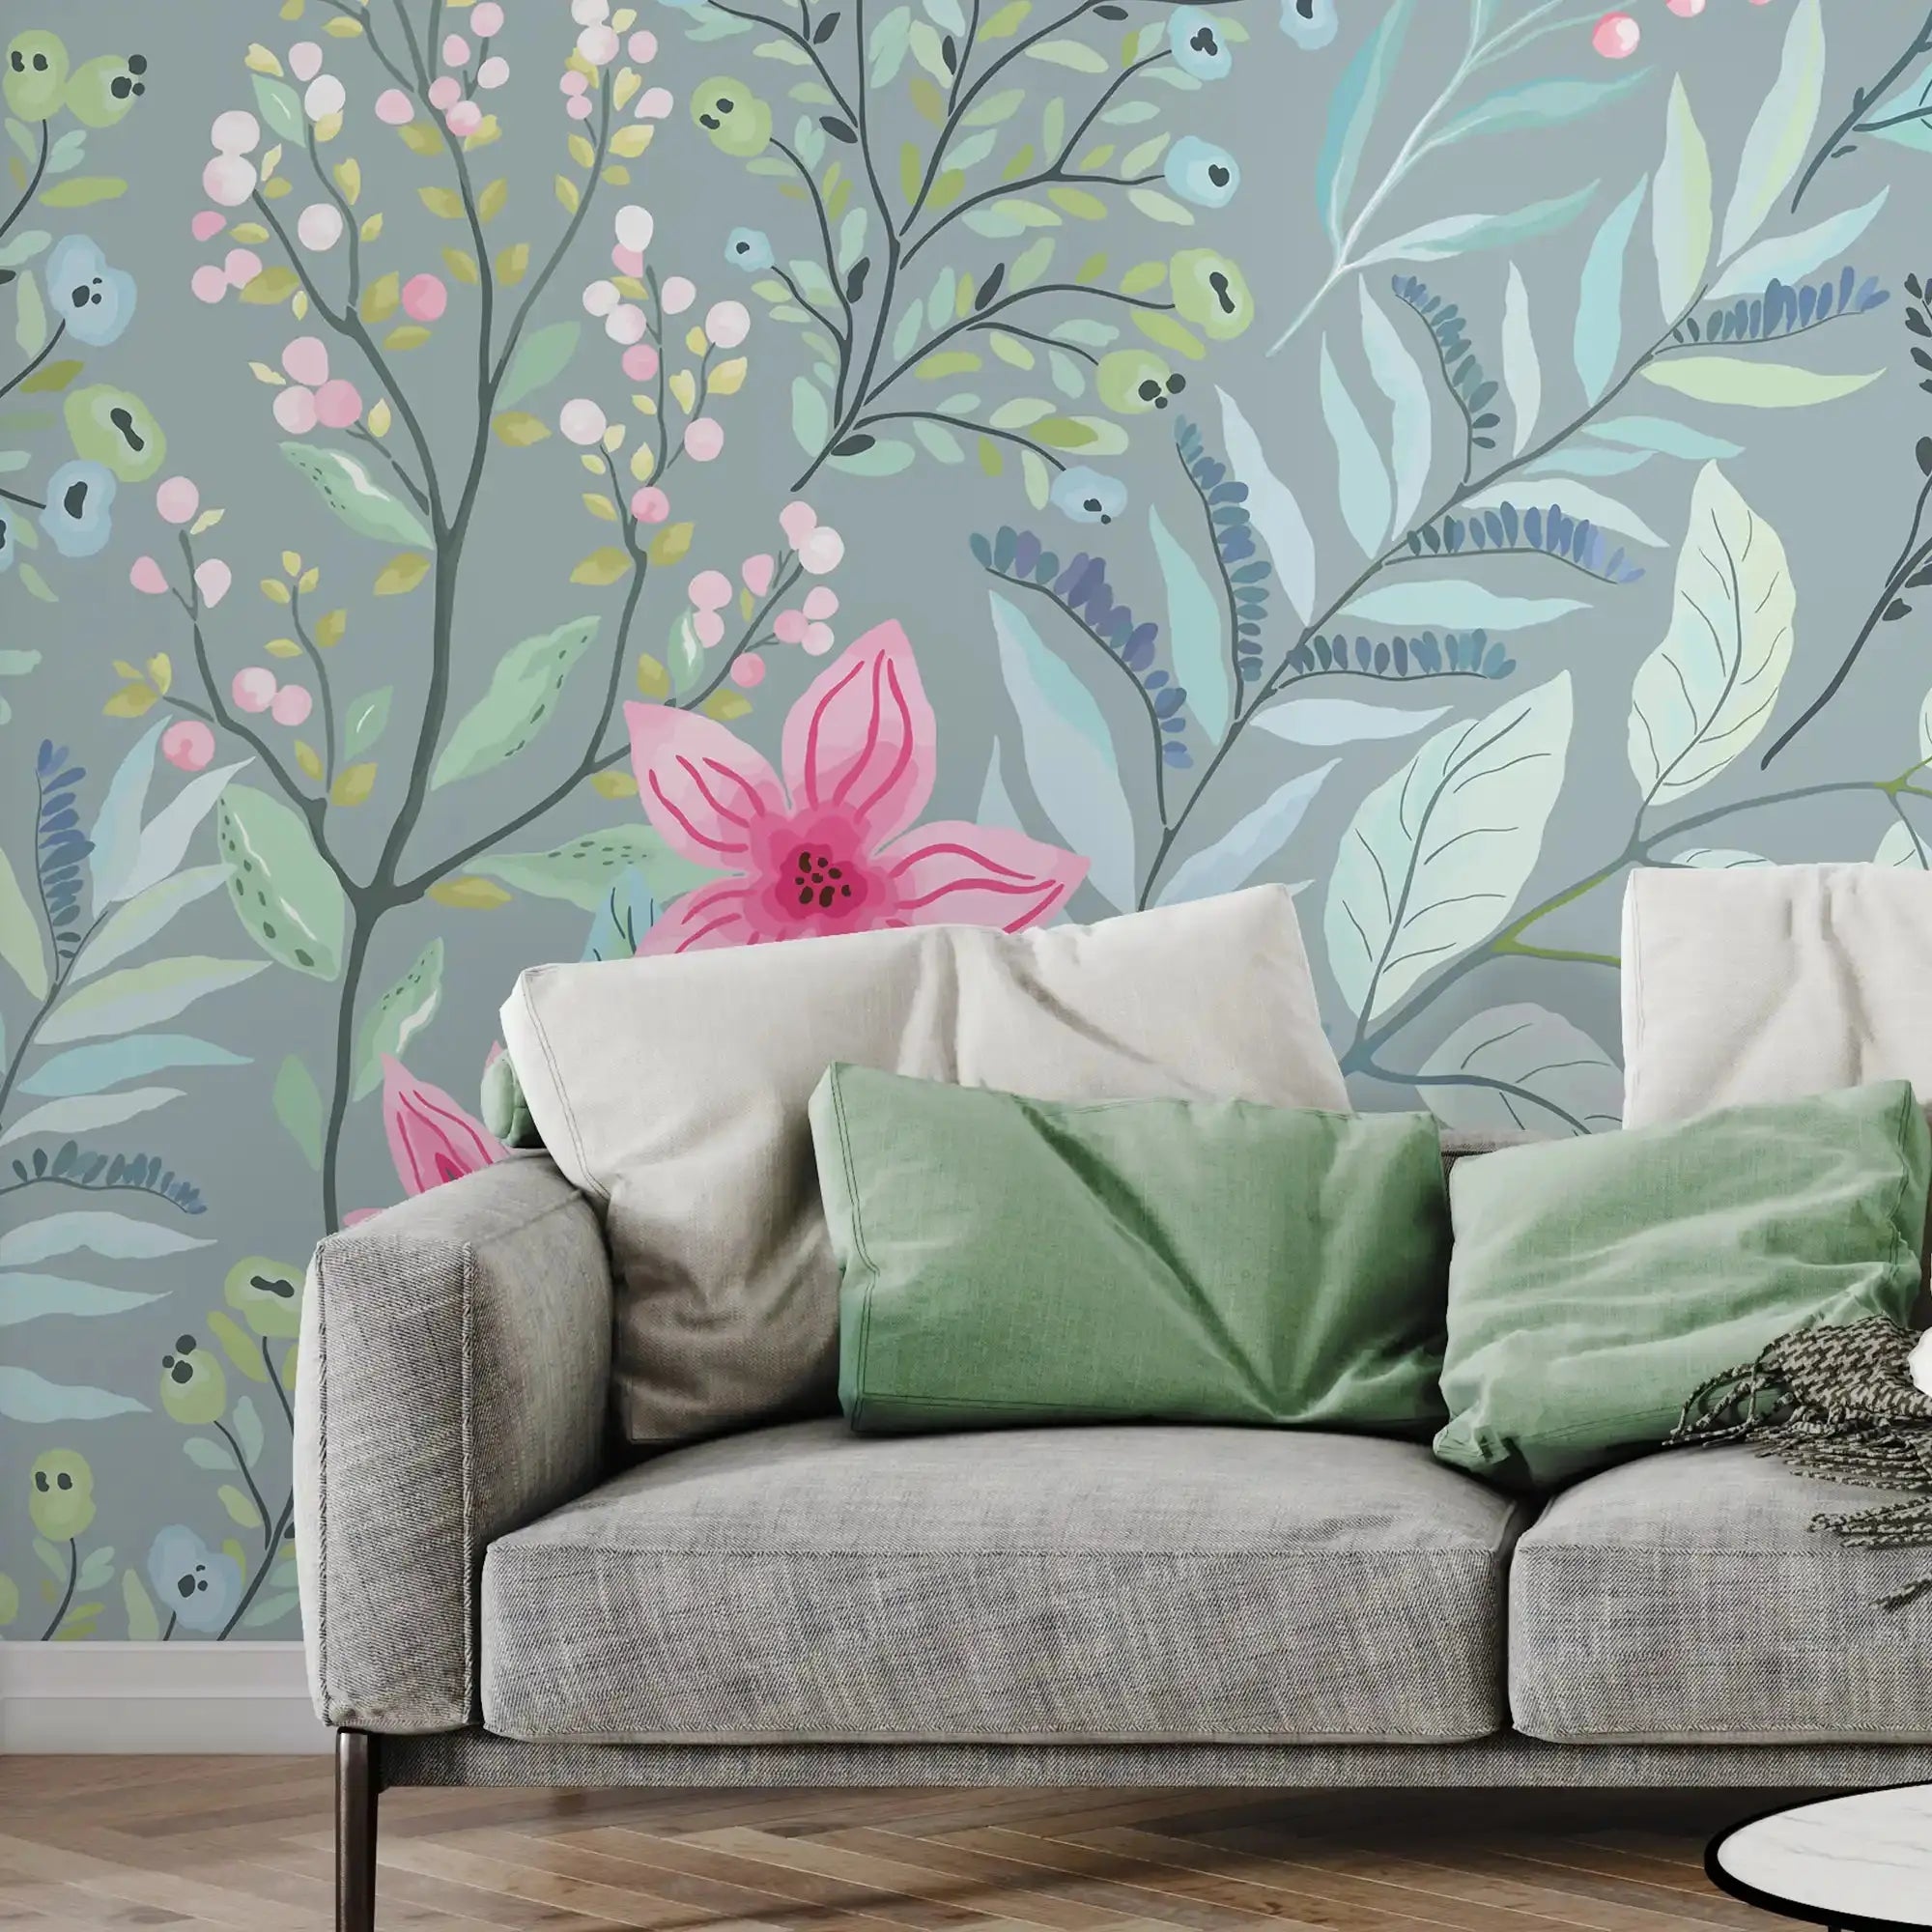 3105-A / Peel and Stick Floral Wallpaper: Pink Flowers and Leaf Design, Easy Apply Wall Decor for Bedroom & Bathroom - Artevella